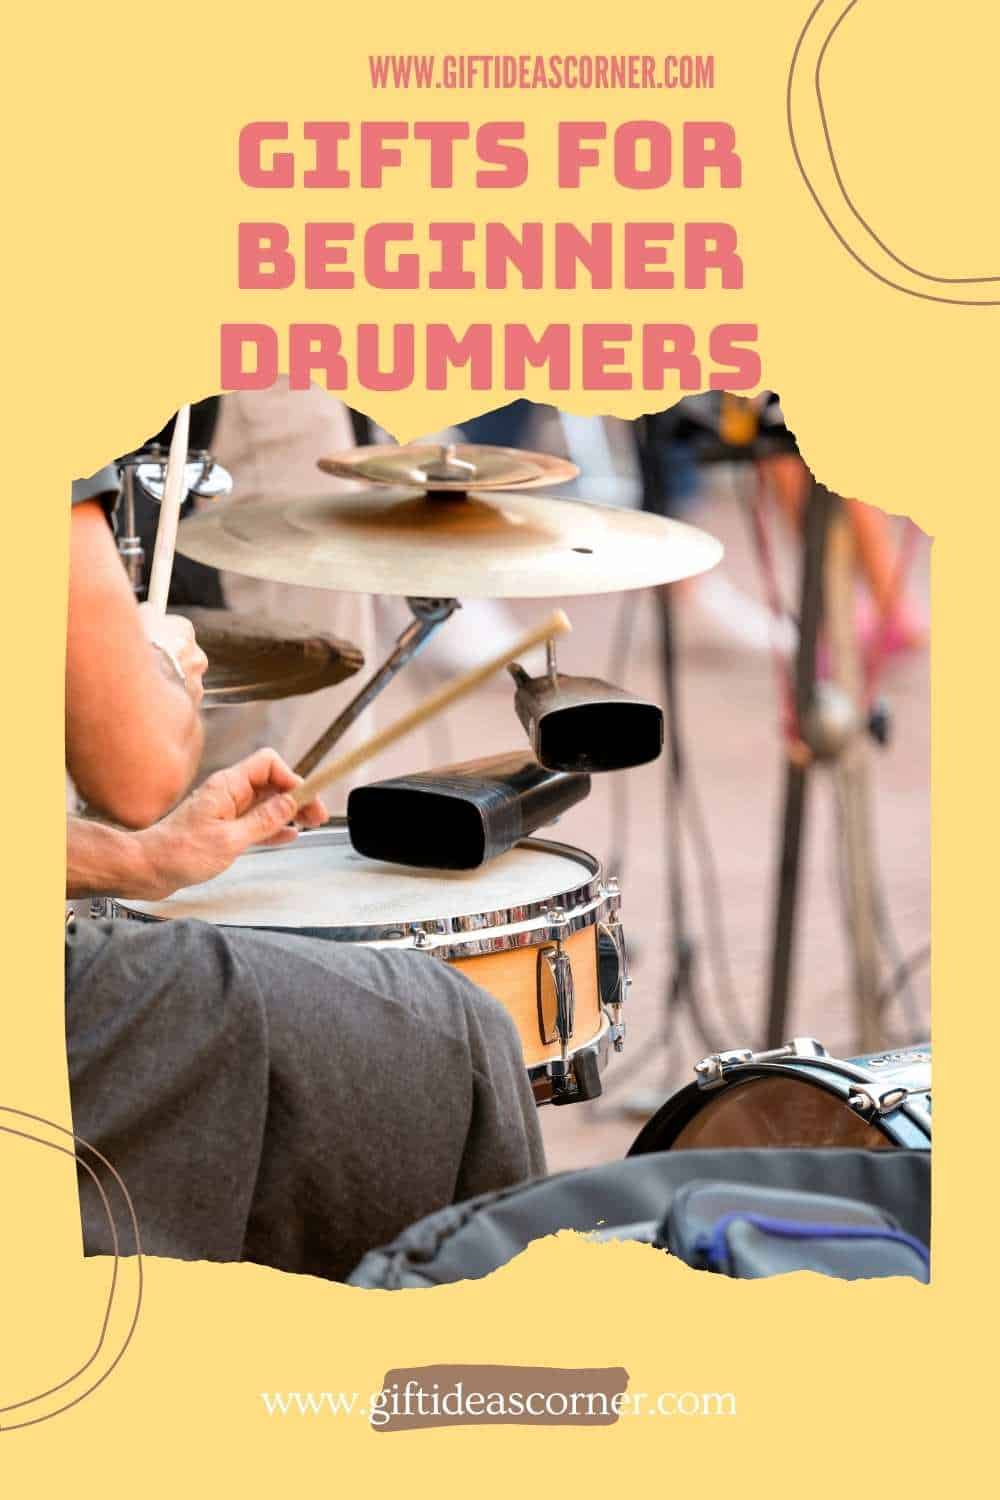 The Ultimate Best Gifts For Drummers Guide Gift Ideas Corner